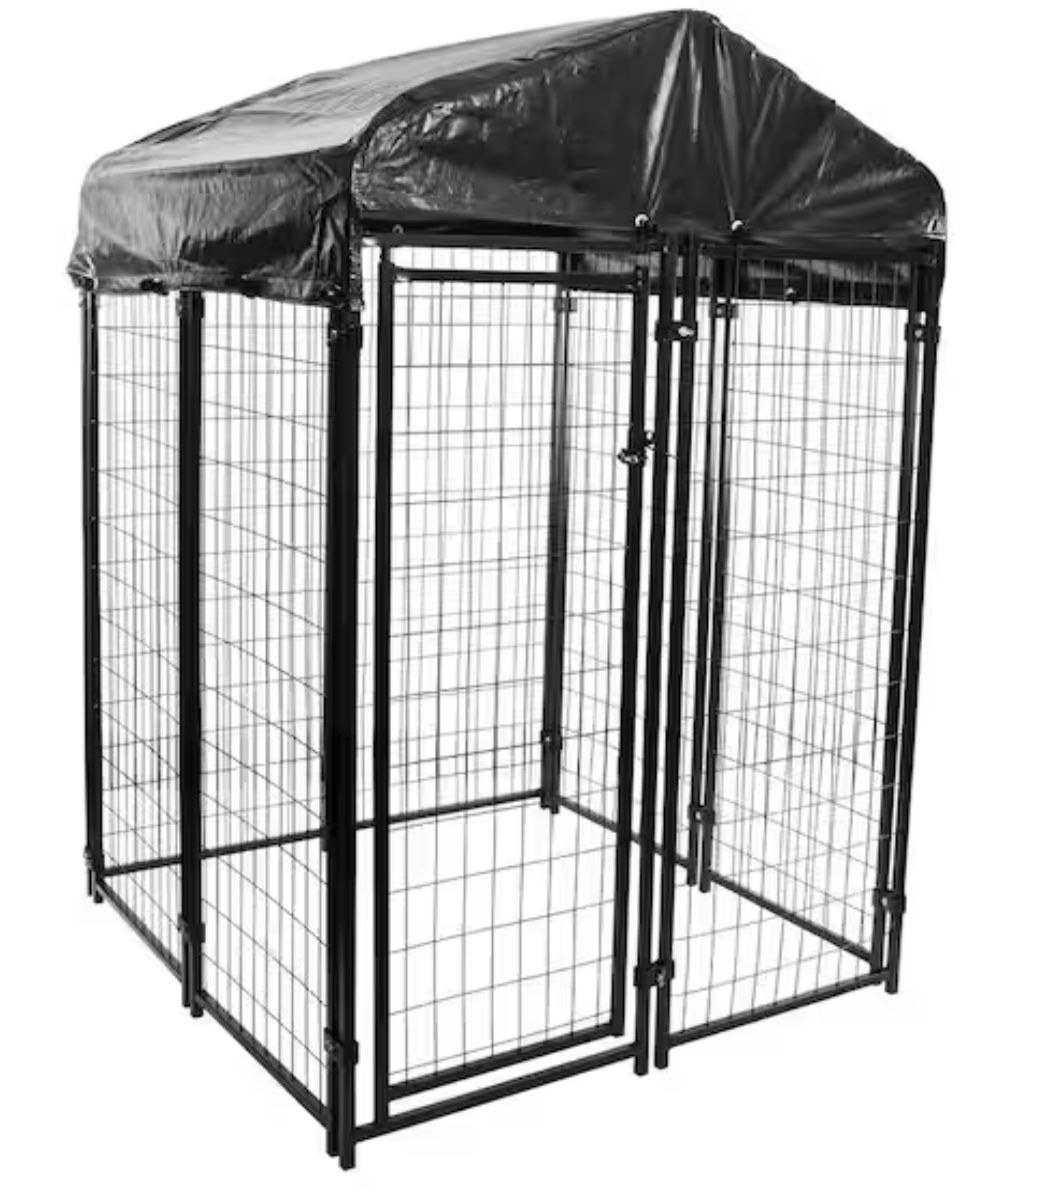 4 ft. x 4 ft. x 6 ft. Outdoor Welded Wire Dog Kennel